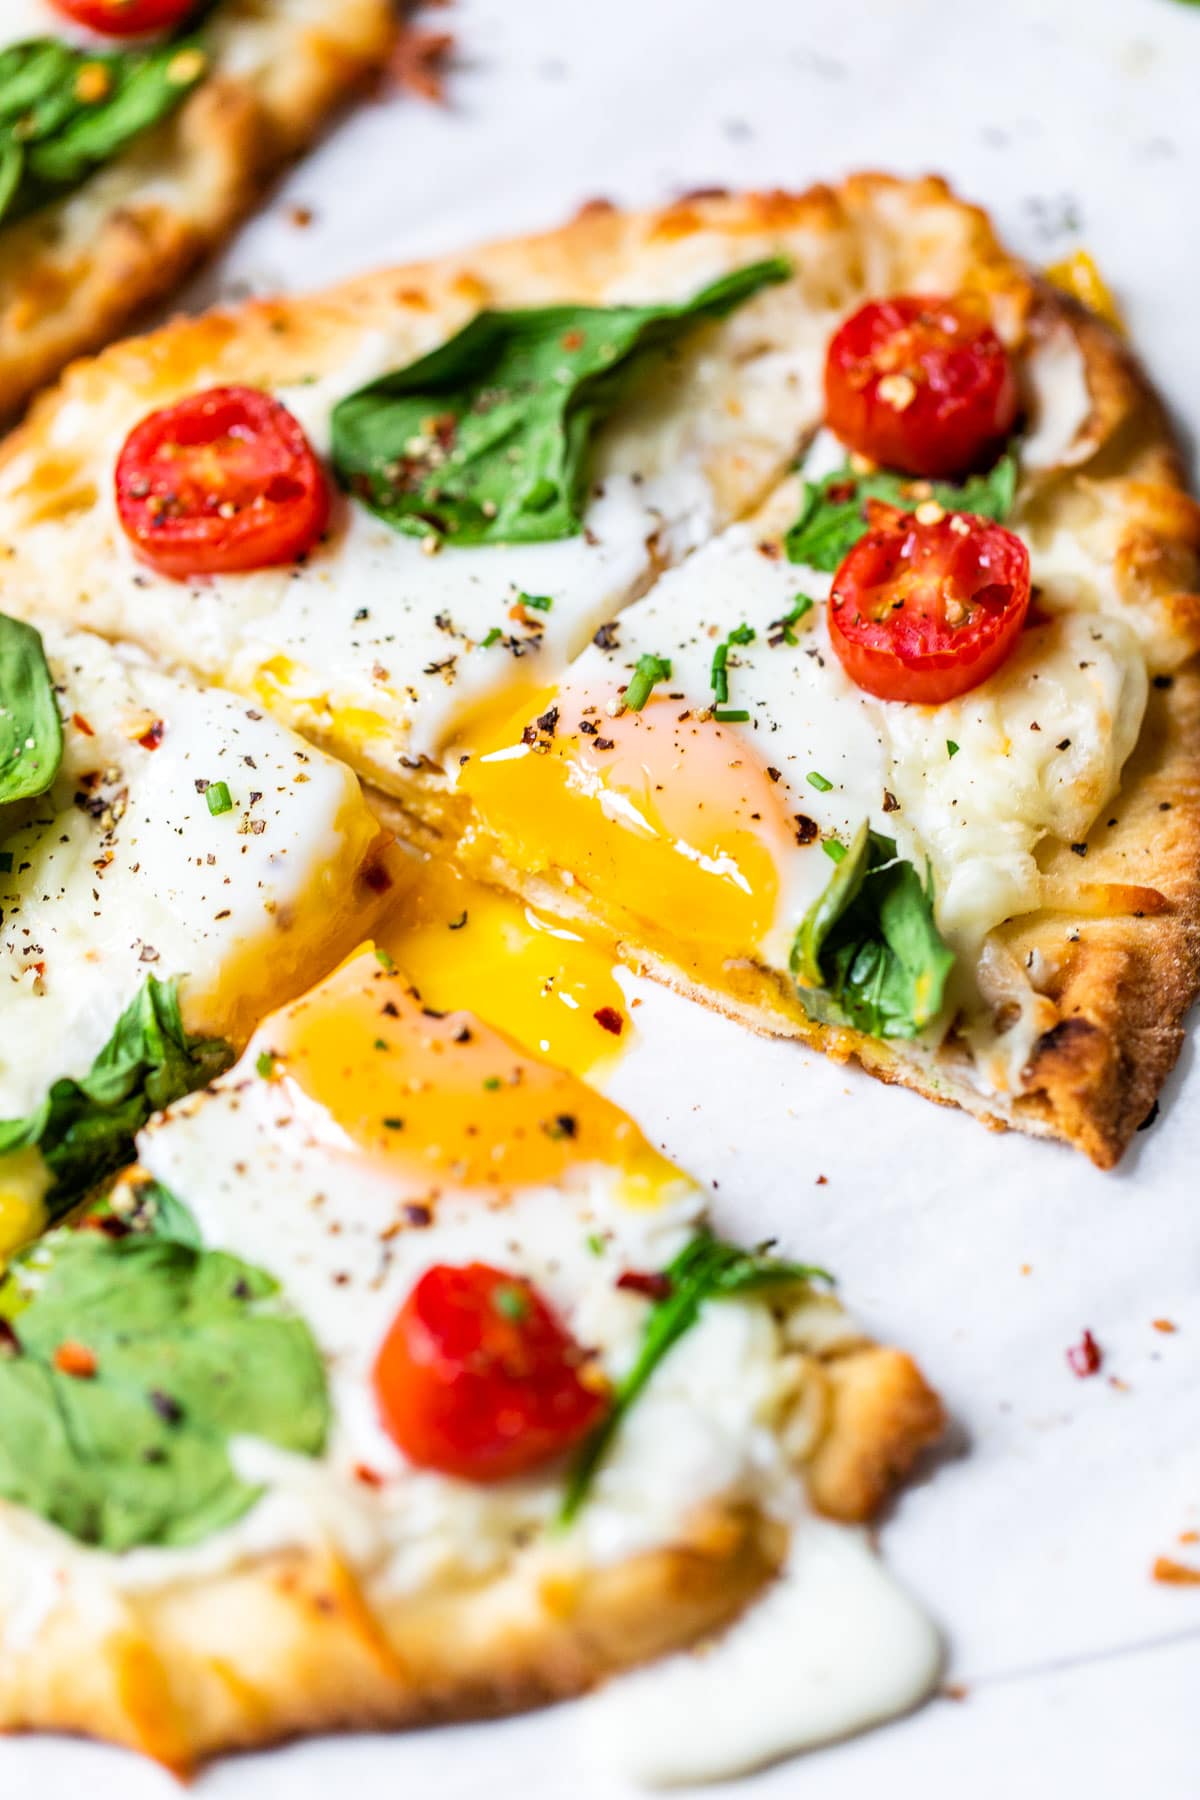 sliced naan pizza with an egg and runny egg yolk